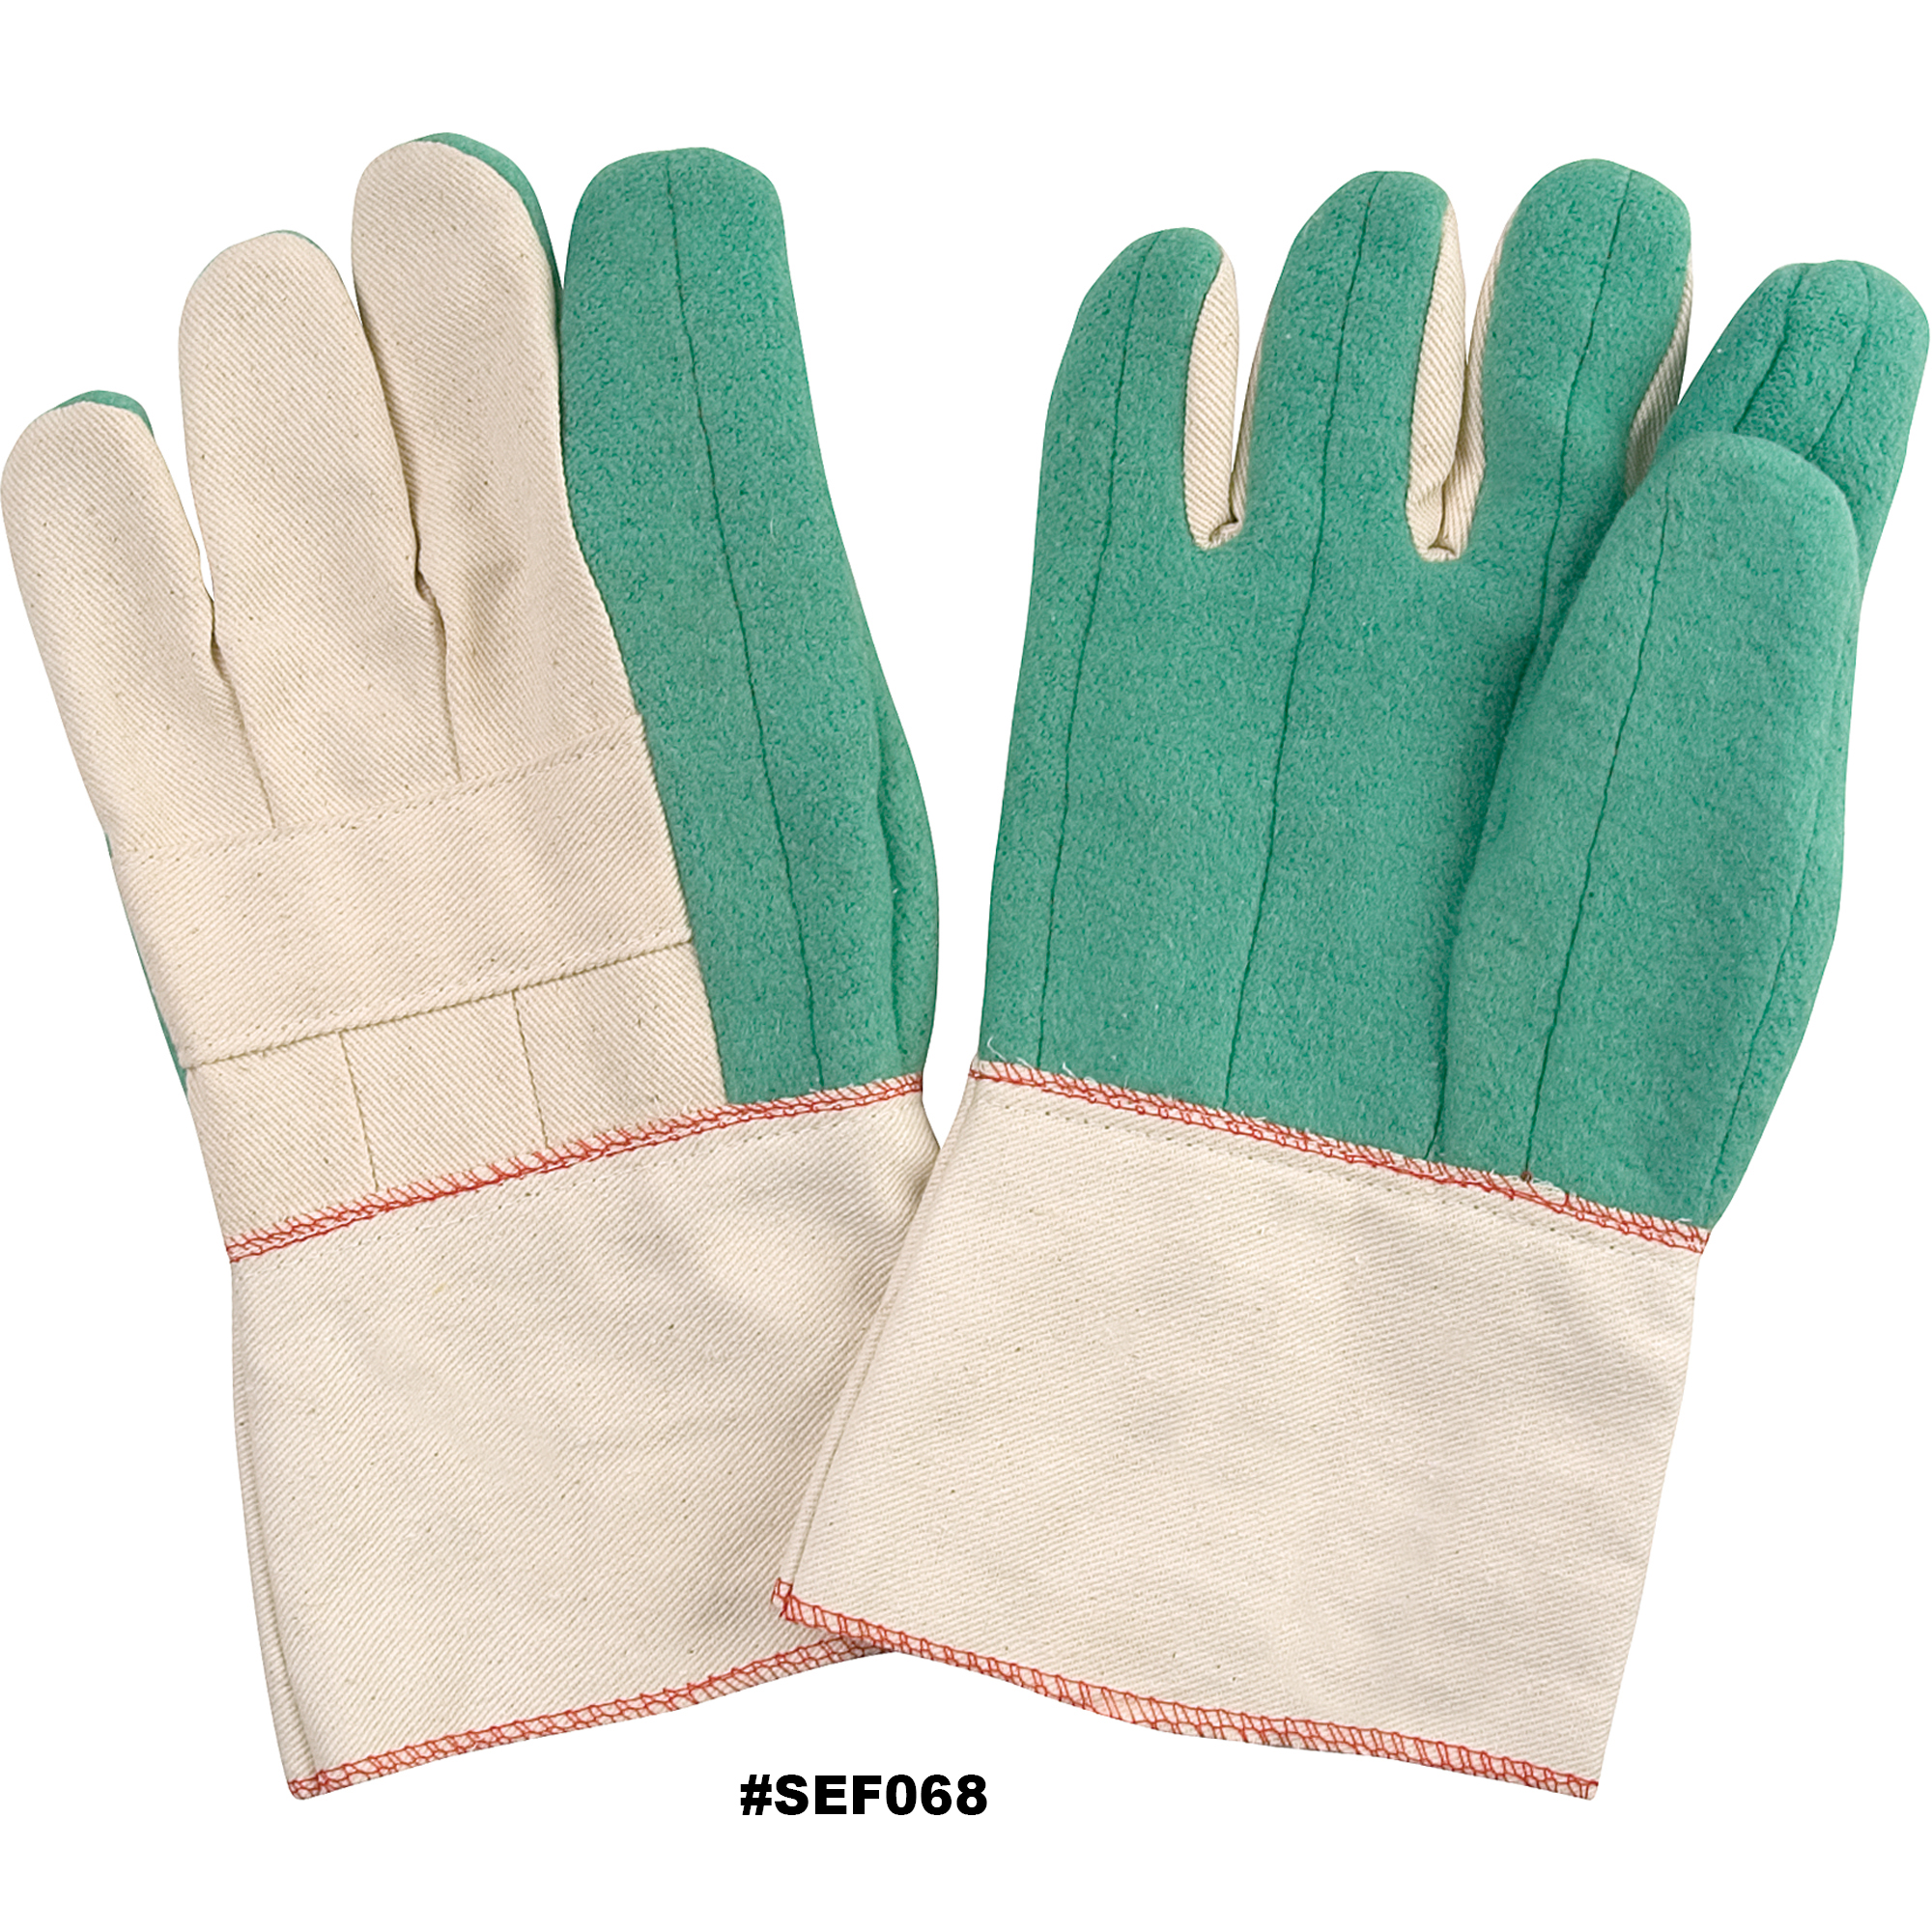 Zenith Hot Mill Gloves, Cotton, X-Large, Protects Up To 482° F (250° C) Model: SEF068